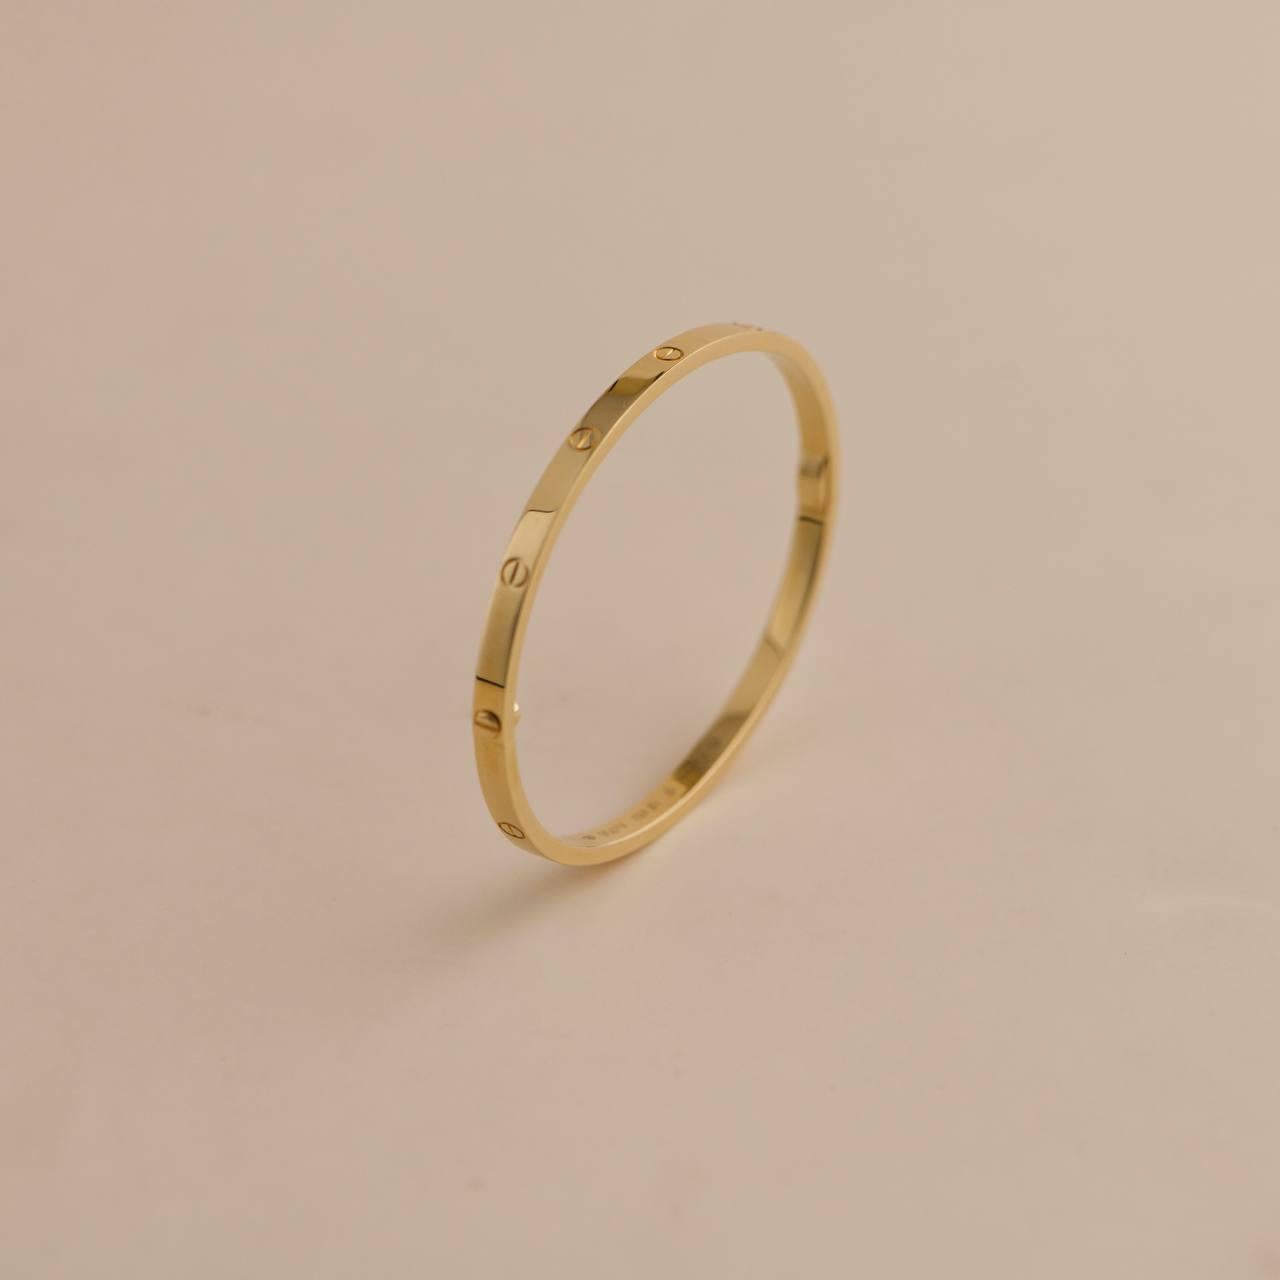 Cartier Love Bracelet Small Model 18K Yellow Gold Size 18 In Excellent Condition For Sale In Banbury, GB